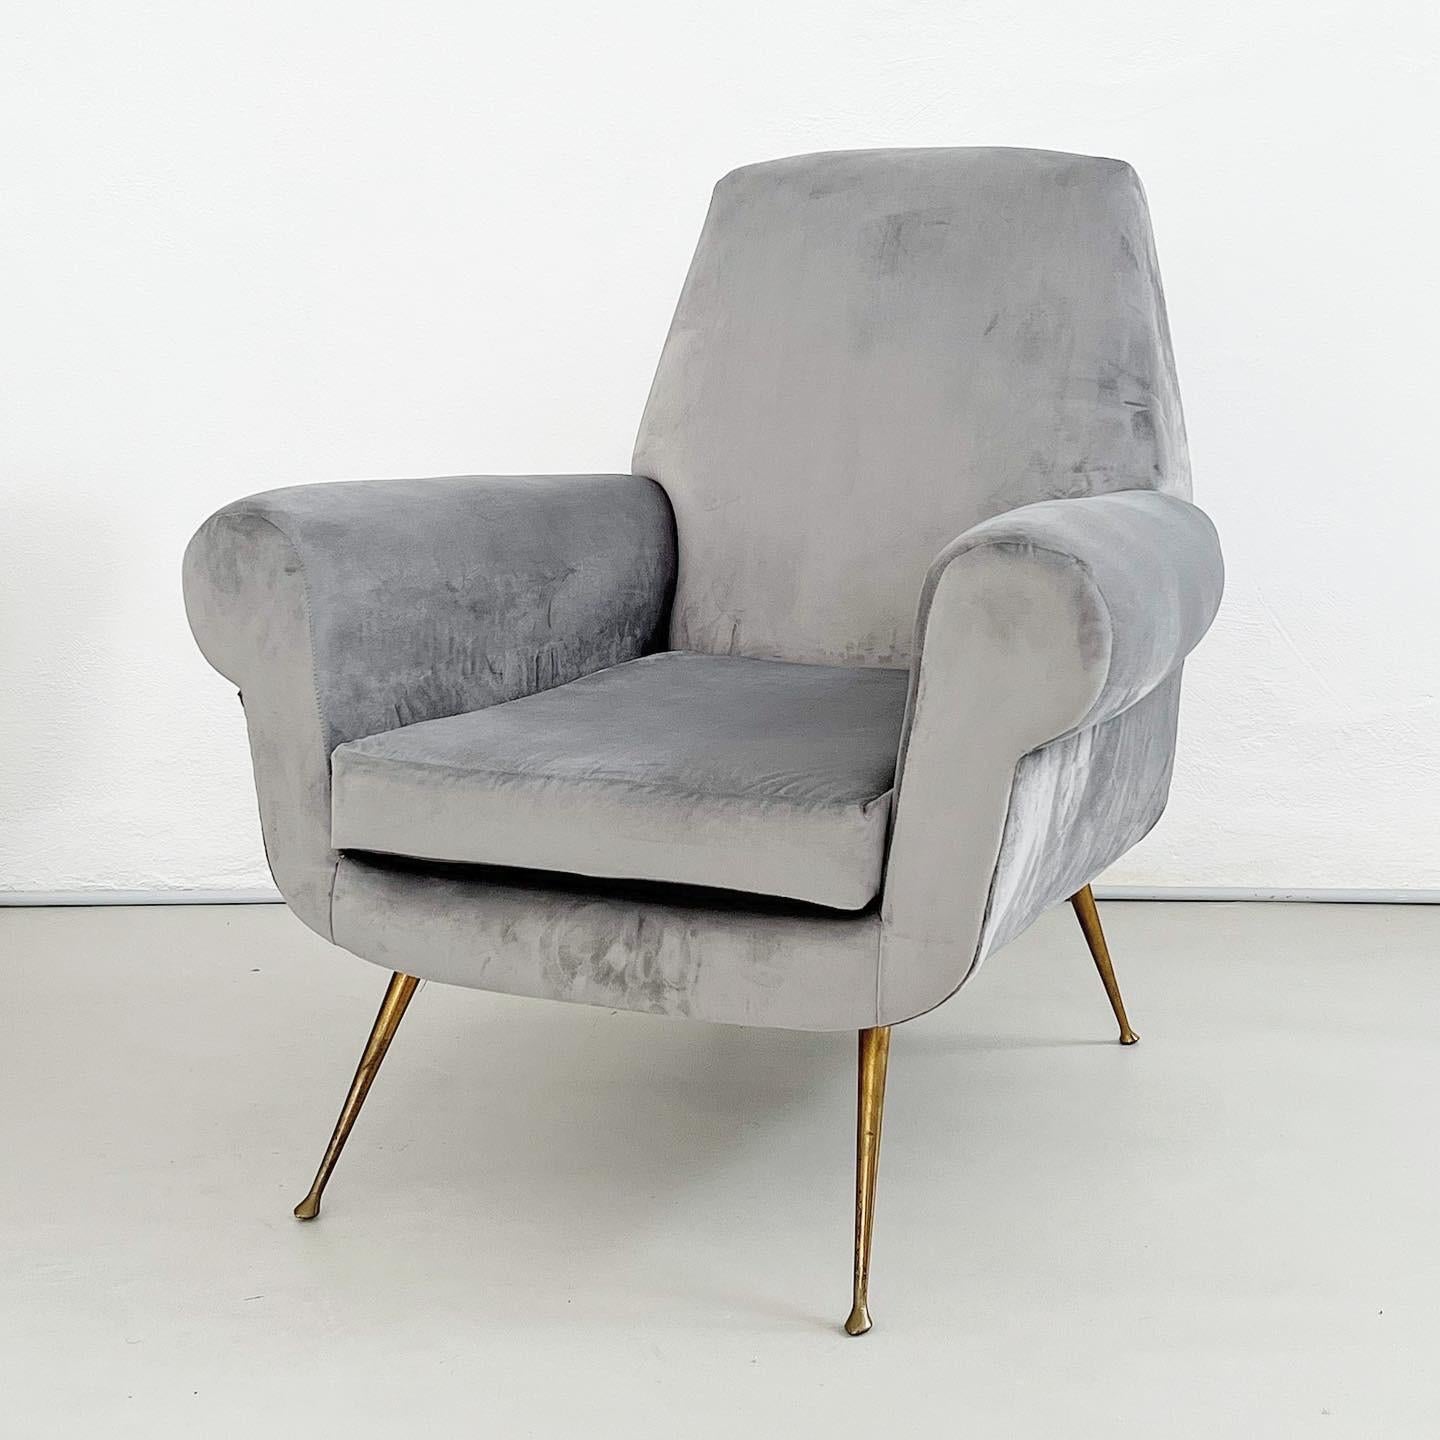 Offered for sale is a great looking and timeless armchair designed by Gigi Radice for Italian furniture brand Minotti in the 1950s. The model is one of the most recognisable creations of the celebrated italian creative, and is becoming harder and